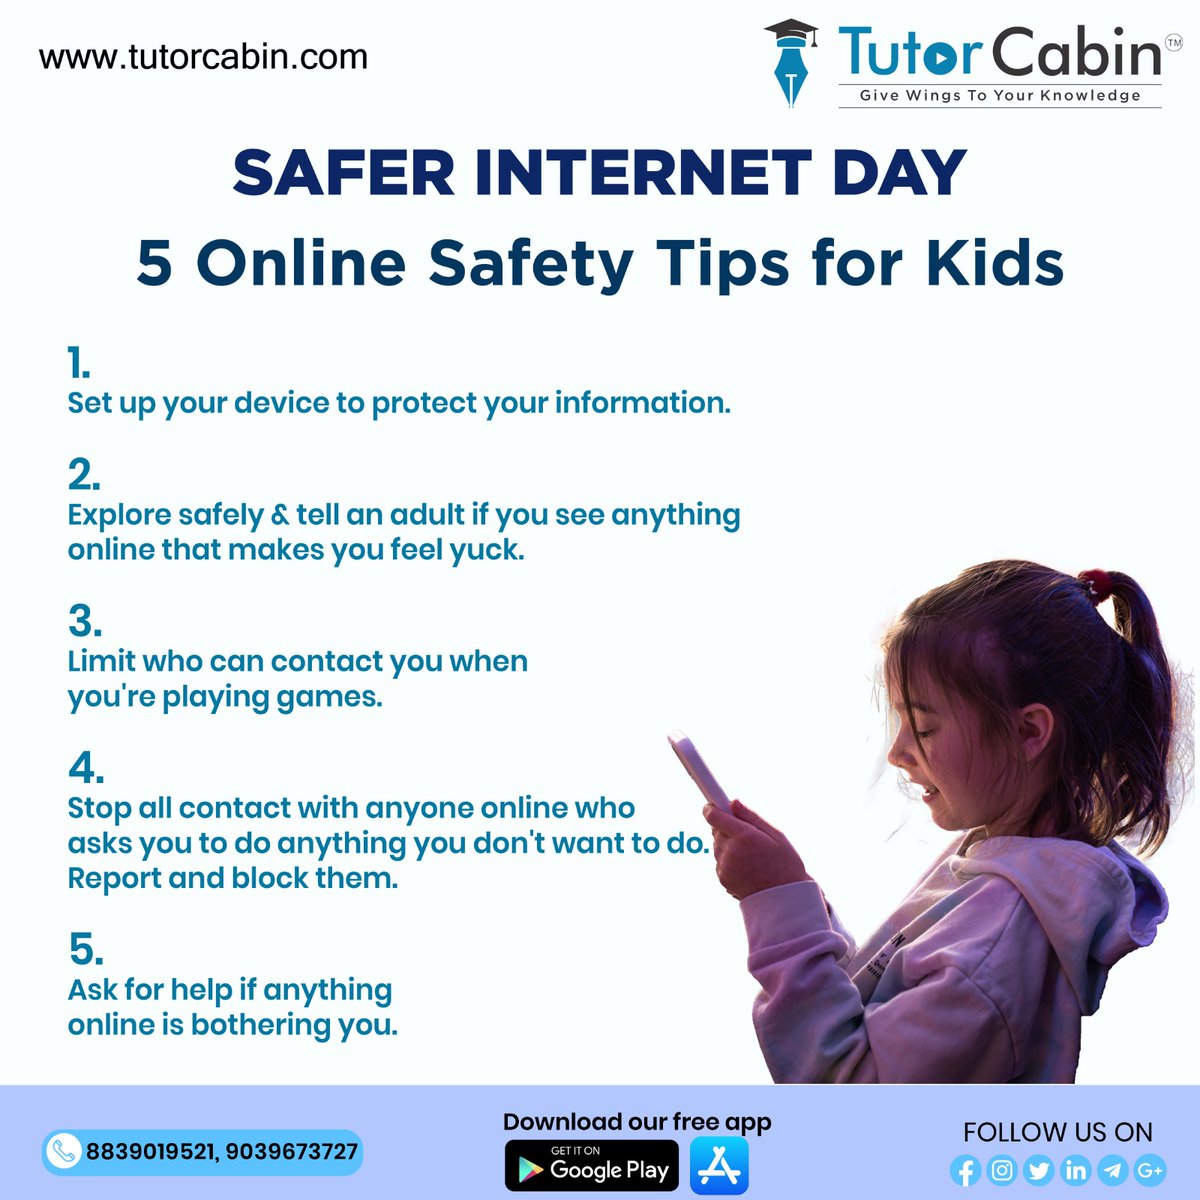 On this Safer Internet Day ensure your child is safe while using phone and surfing internet. 

Grab TutorCabin course: bit.ly/m/TutorCabin

#SaferInternetDay #Tutorcabin #courses #internetsafety #internetaddiction #mobileadfiction #coursesforchildren #onlineclasses